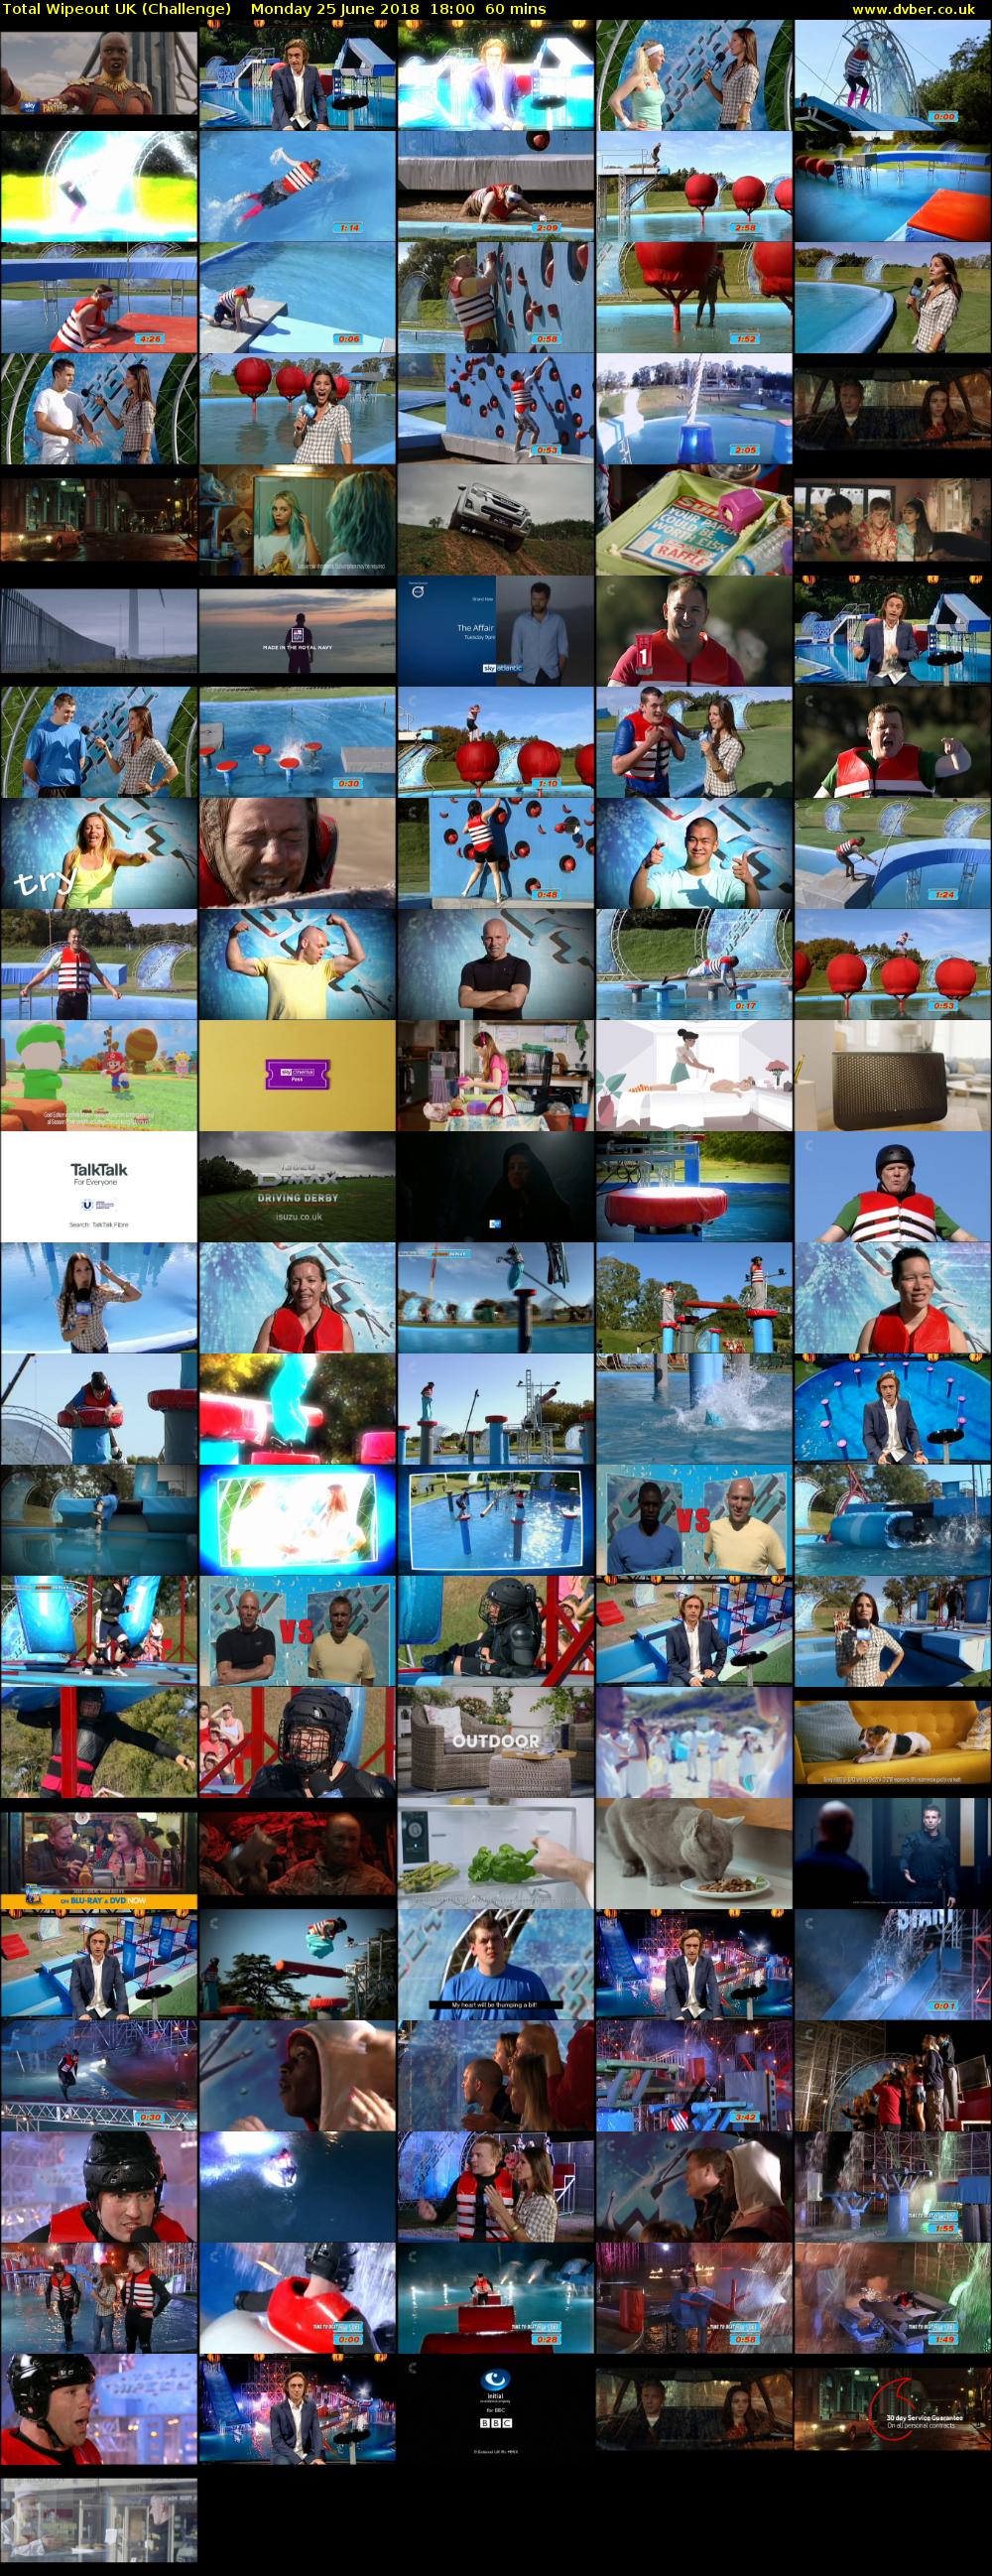 Total Wipeout UK (Challenge) Monday 25 June 2018 18:00 - 19:00